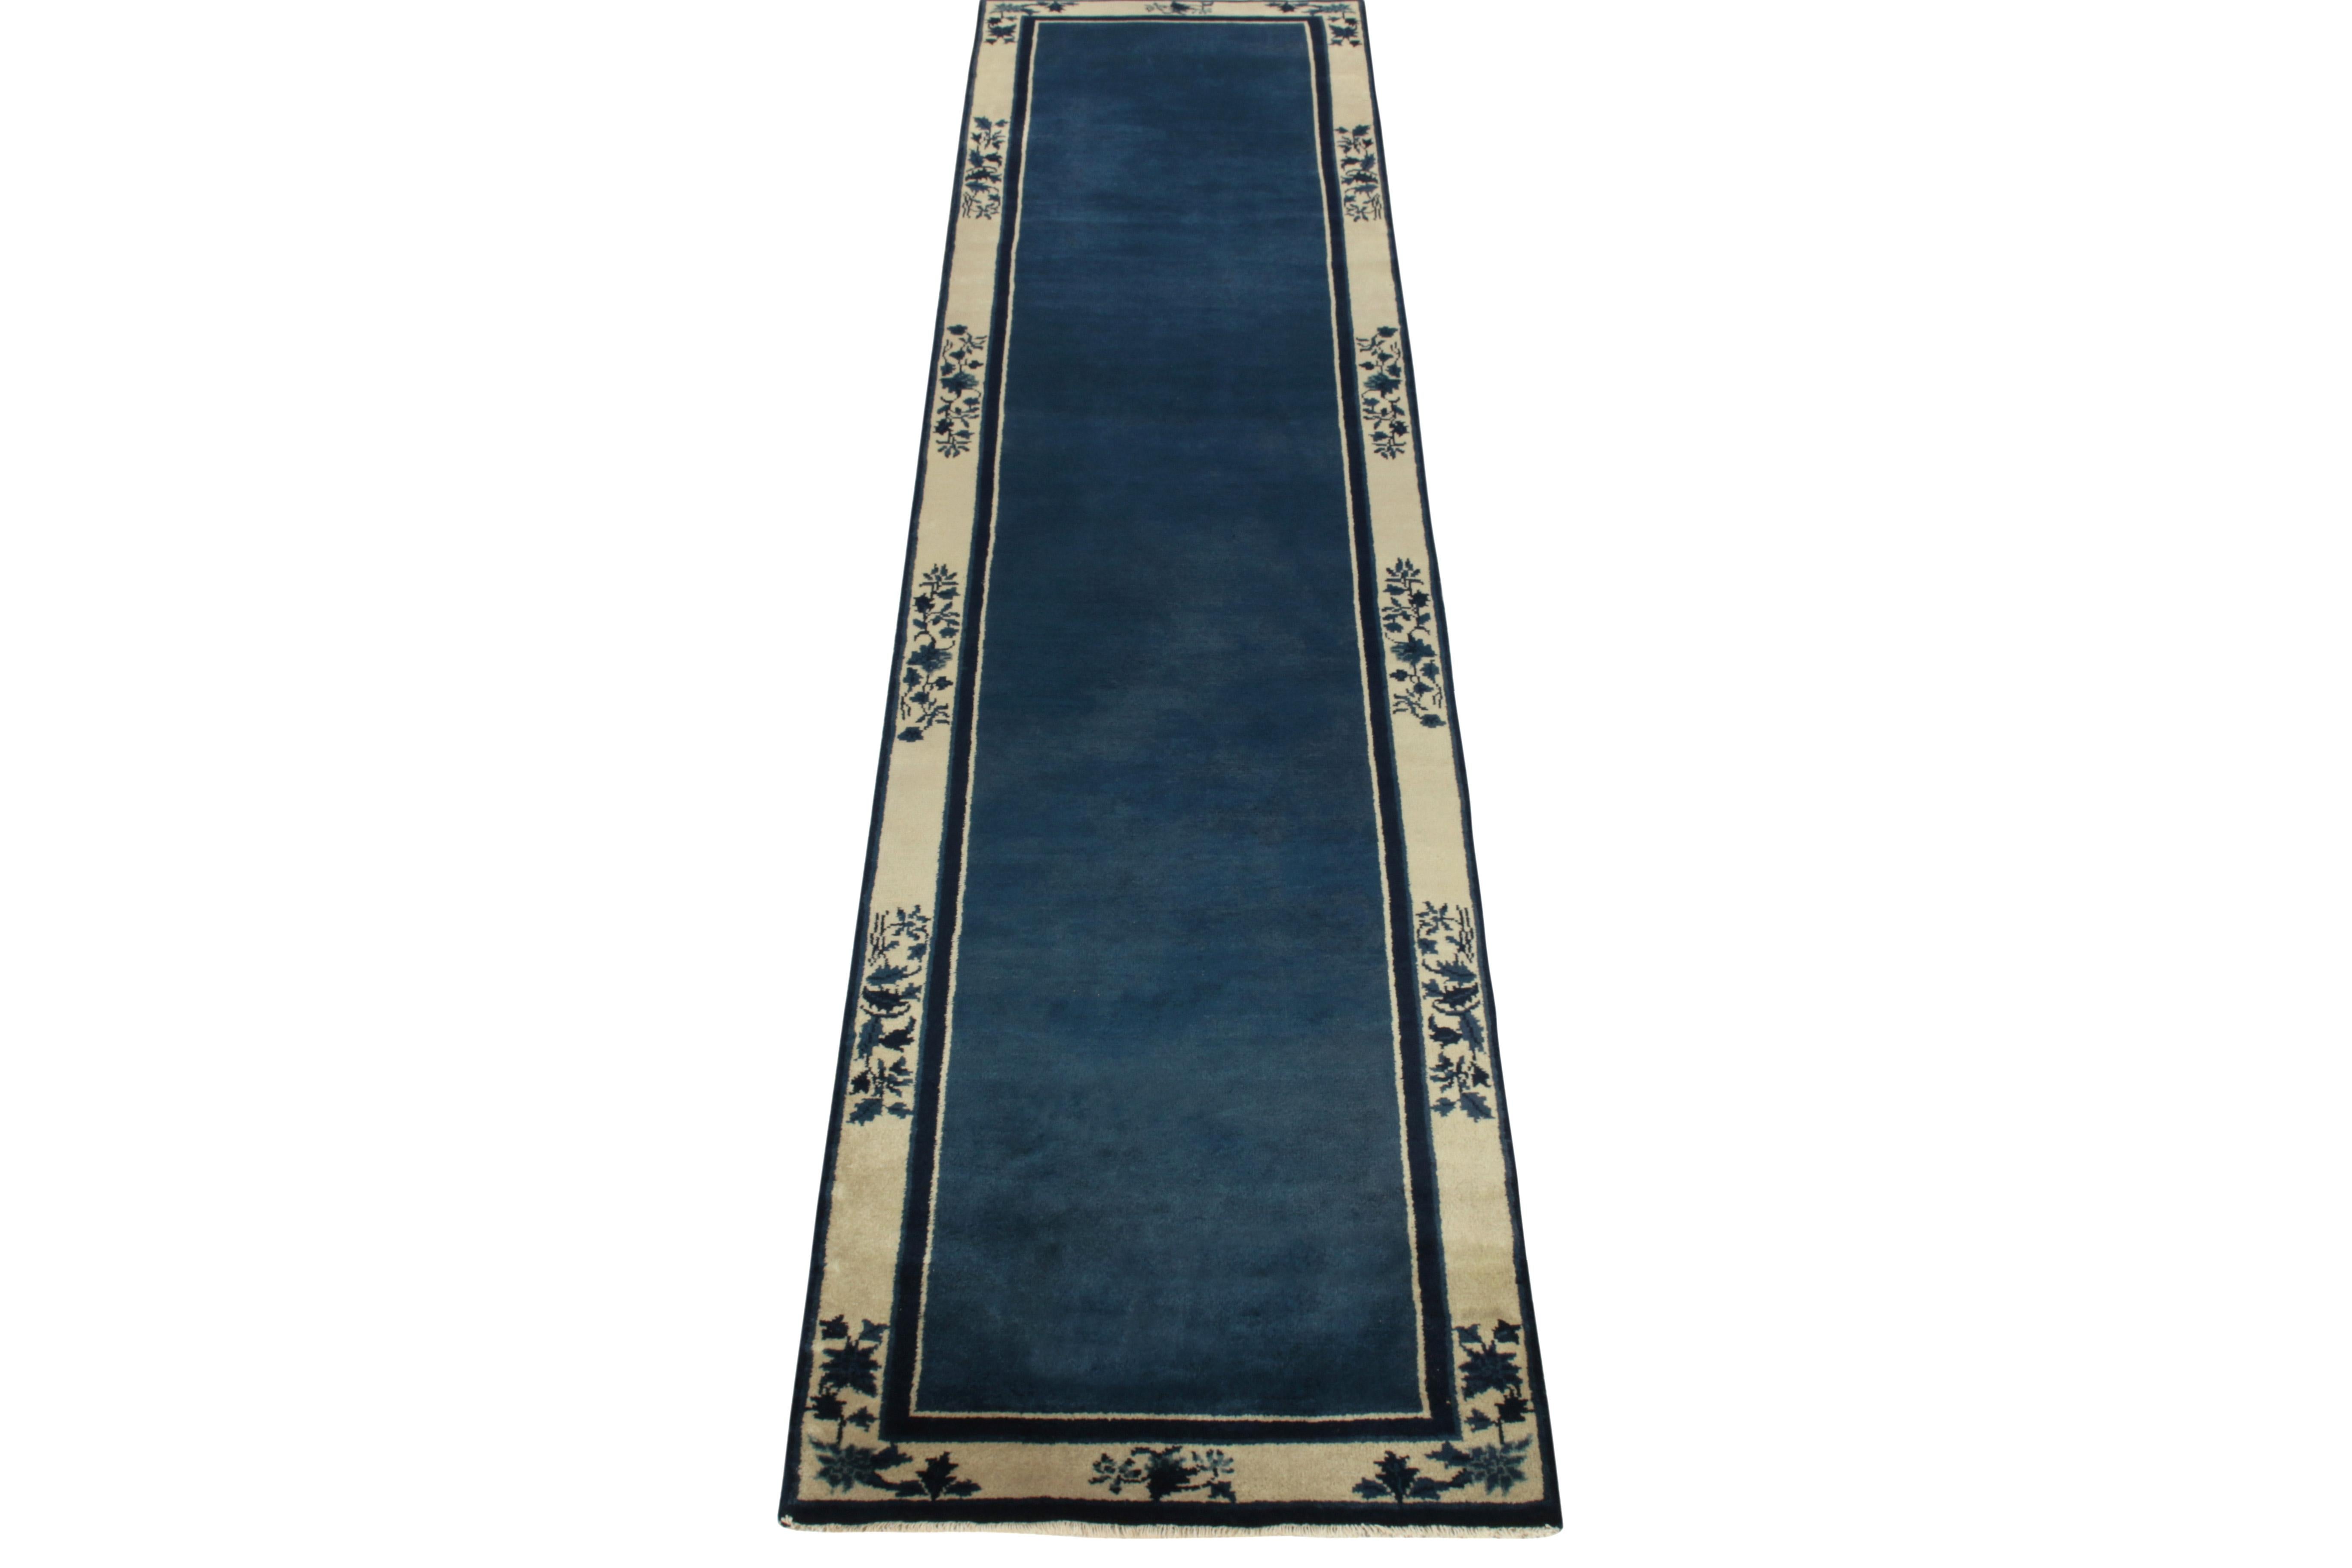 A hand-knotted wool vintage runner connoting Chinese art deco sensibilities inspired from the 1920s, joining Rug & Kilim’s latest classic collection. The clean blue open field enjoys light dark spots for an interesting visual appeal on scale further